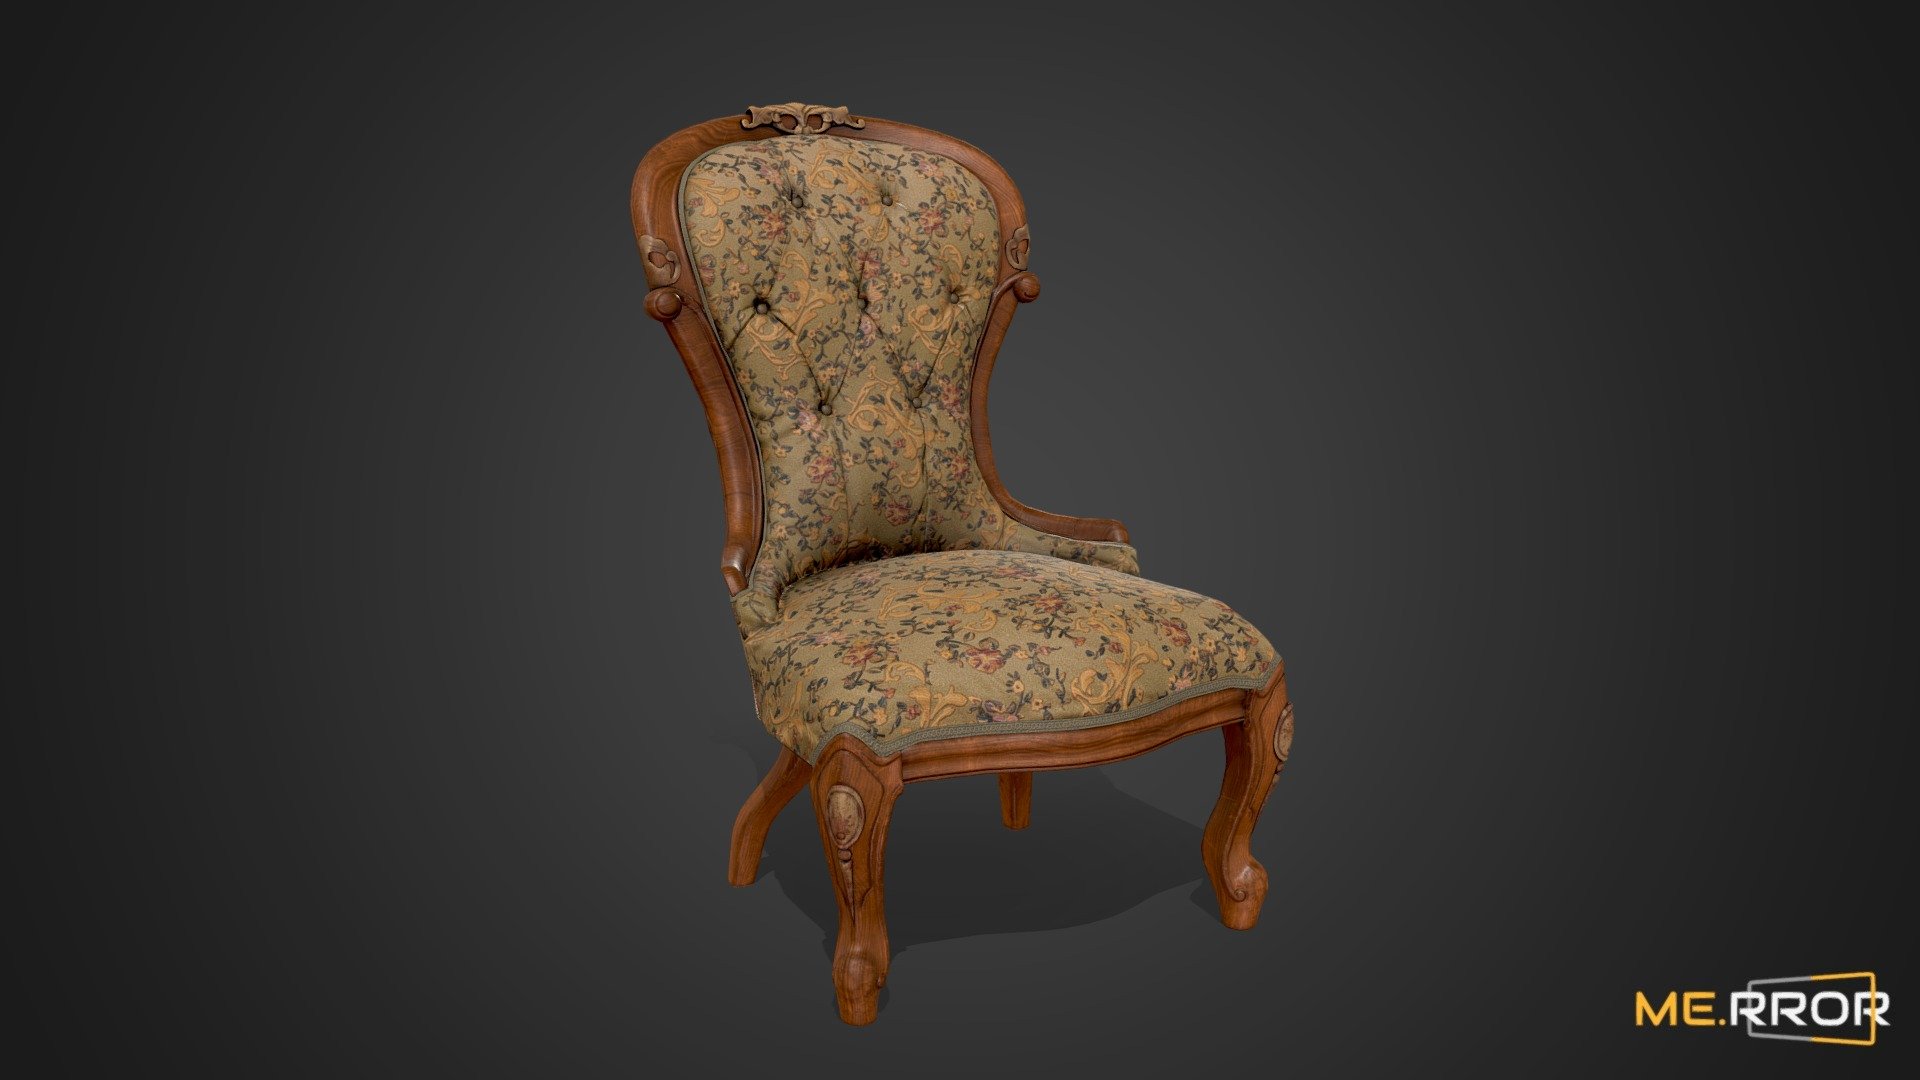 MERROR is a 3D Content PLATFORM which introduces various Asian assets to the 3D world


3DScanning #Photogrametry #ME.RROR - [Game-Ready] Antique Floral Chair - Buy Royalty Free 3D model by ME.RROR Studio (@merror) 3d model